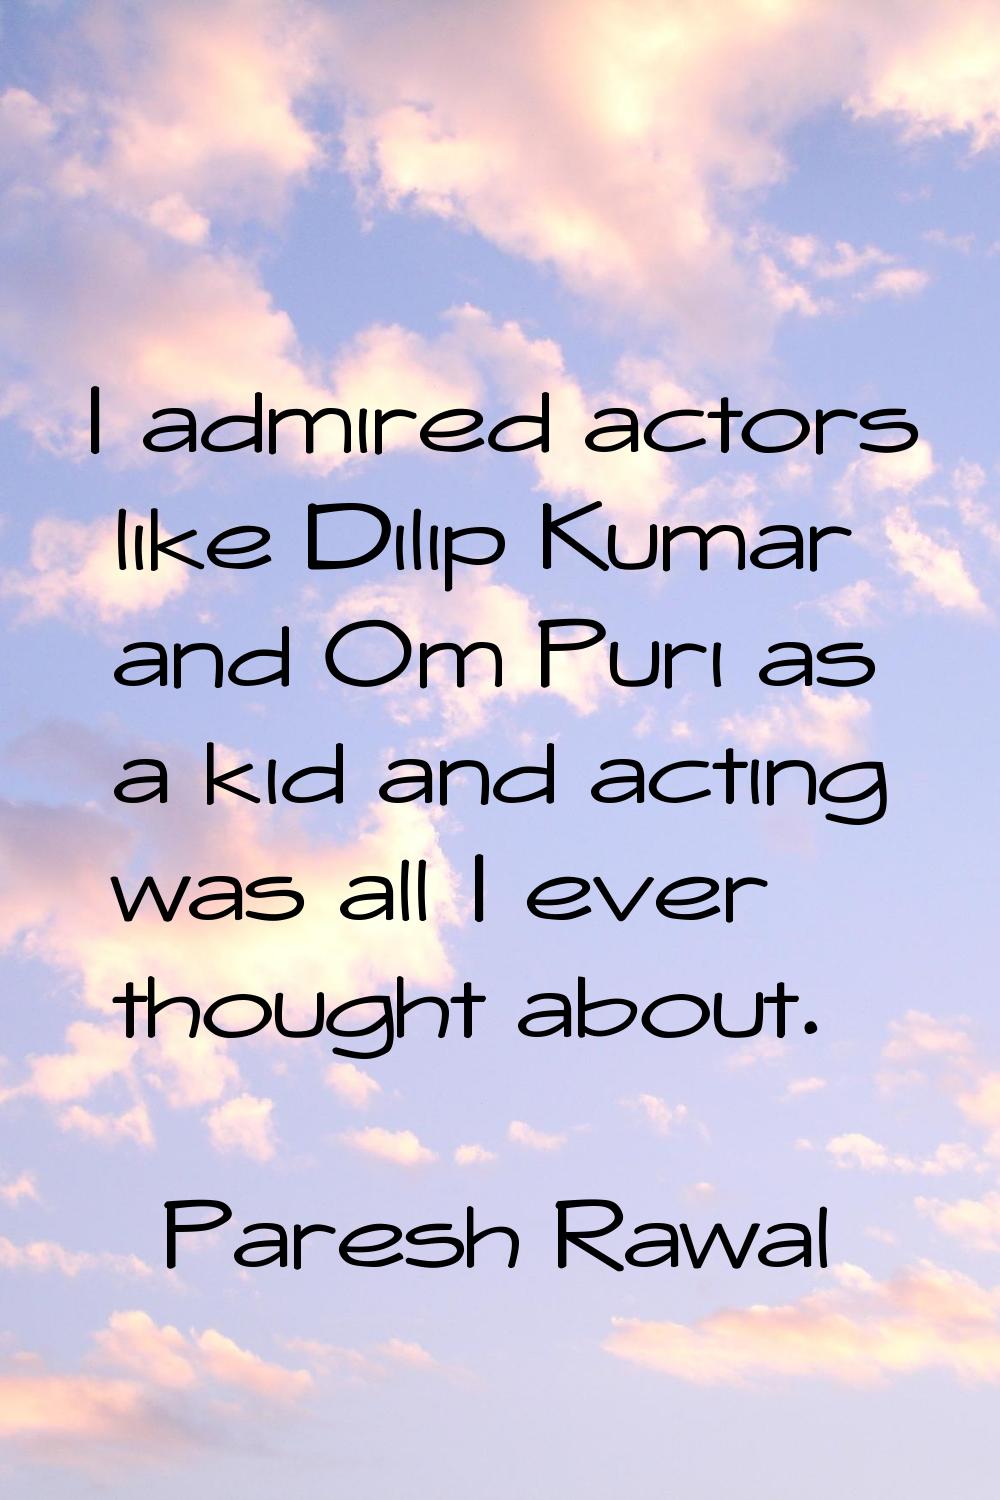 I admired actors like Dilip Kumar and Om Puri as a kid and acting was all I ever thought about.